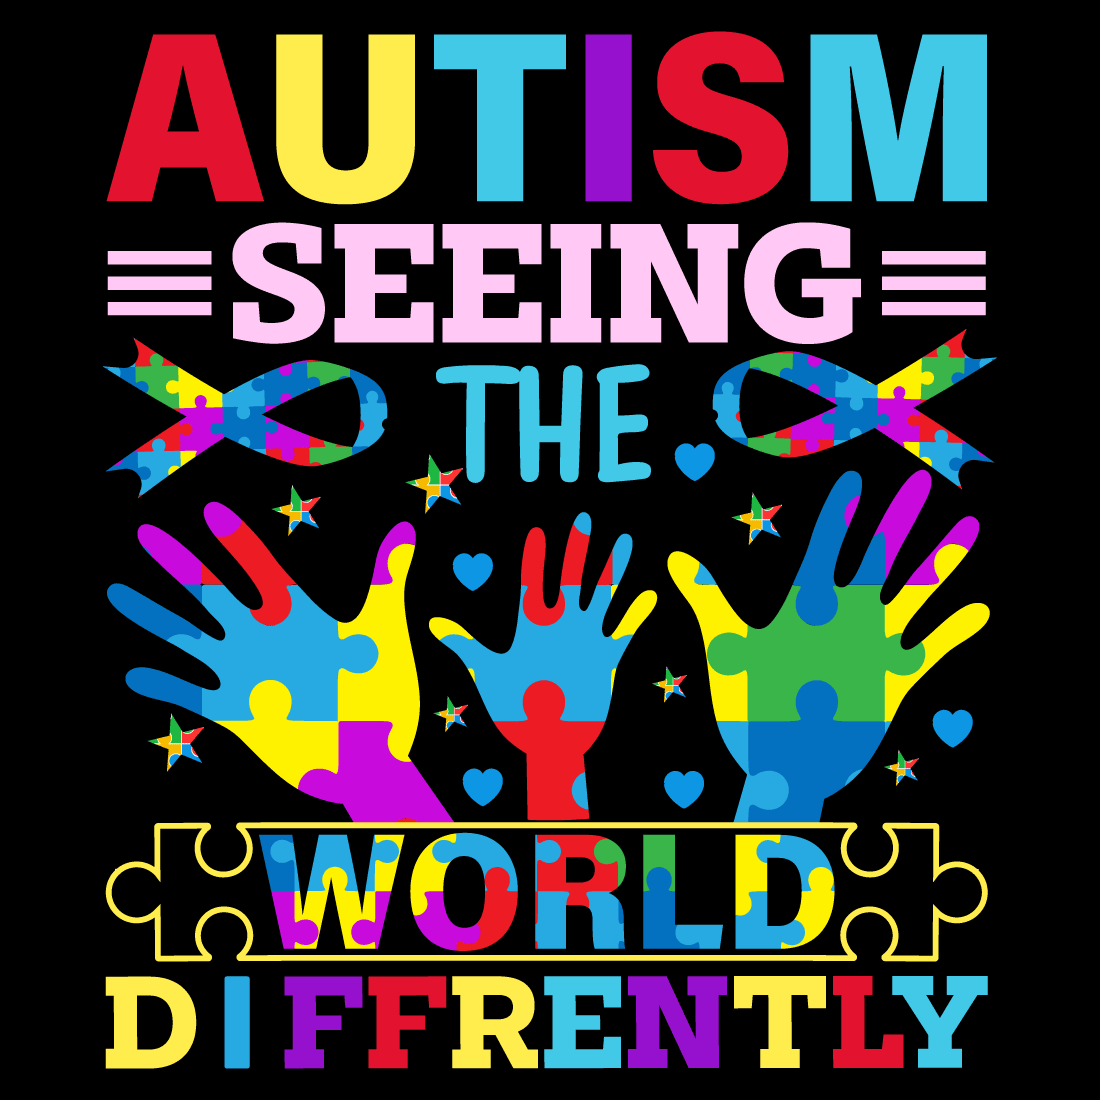 Poster that says autism seeing the world differently.